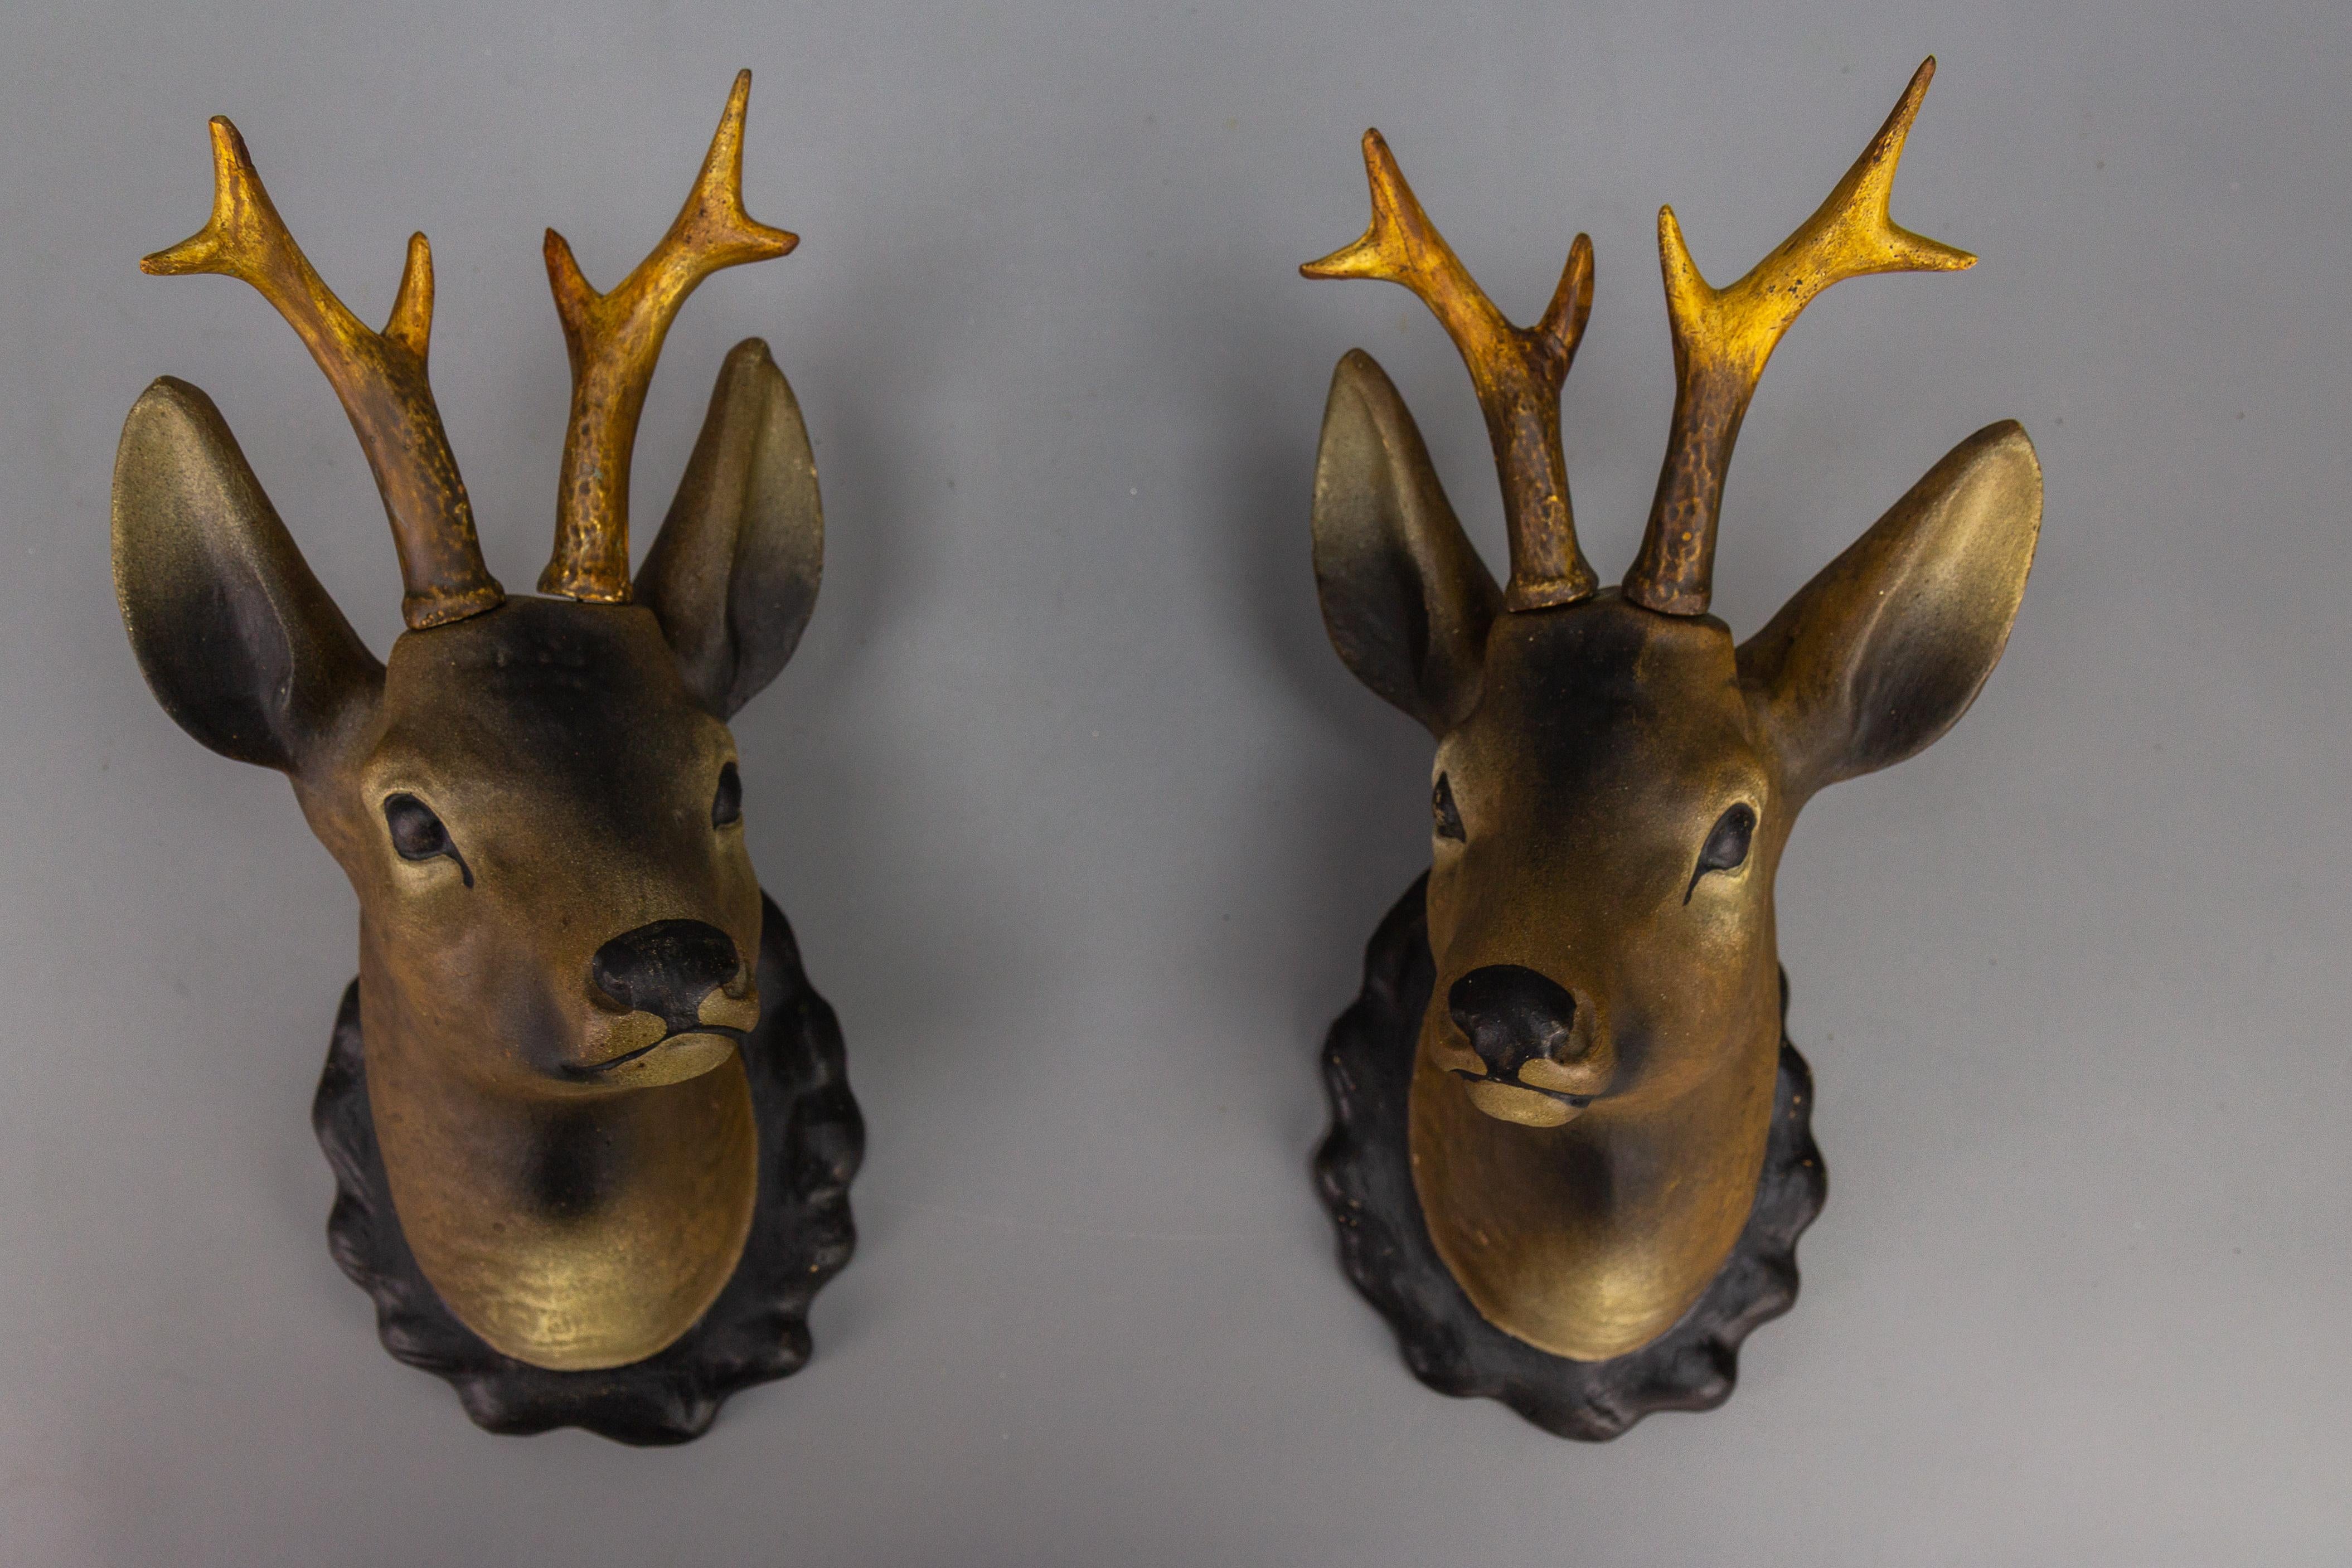 Roe deer heads, wall decoration, made of plaster, Germany, 1930s, set of two.
An absolutely adorable pair of roe deer heads in the Black Forest style is made entirely of plaster and hand-painted in brown and black colors. The antlers of both deer